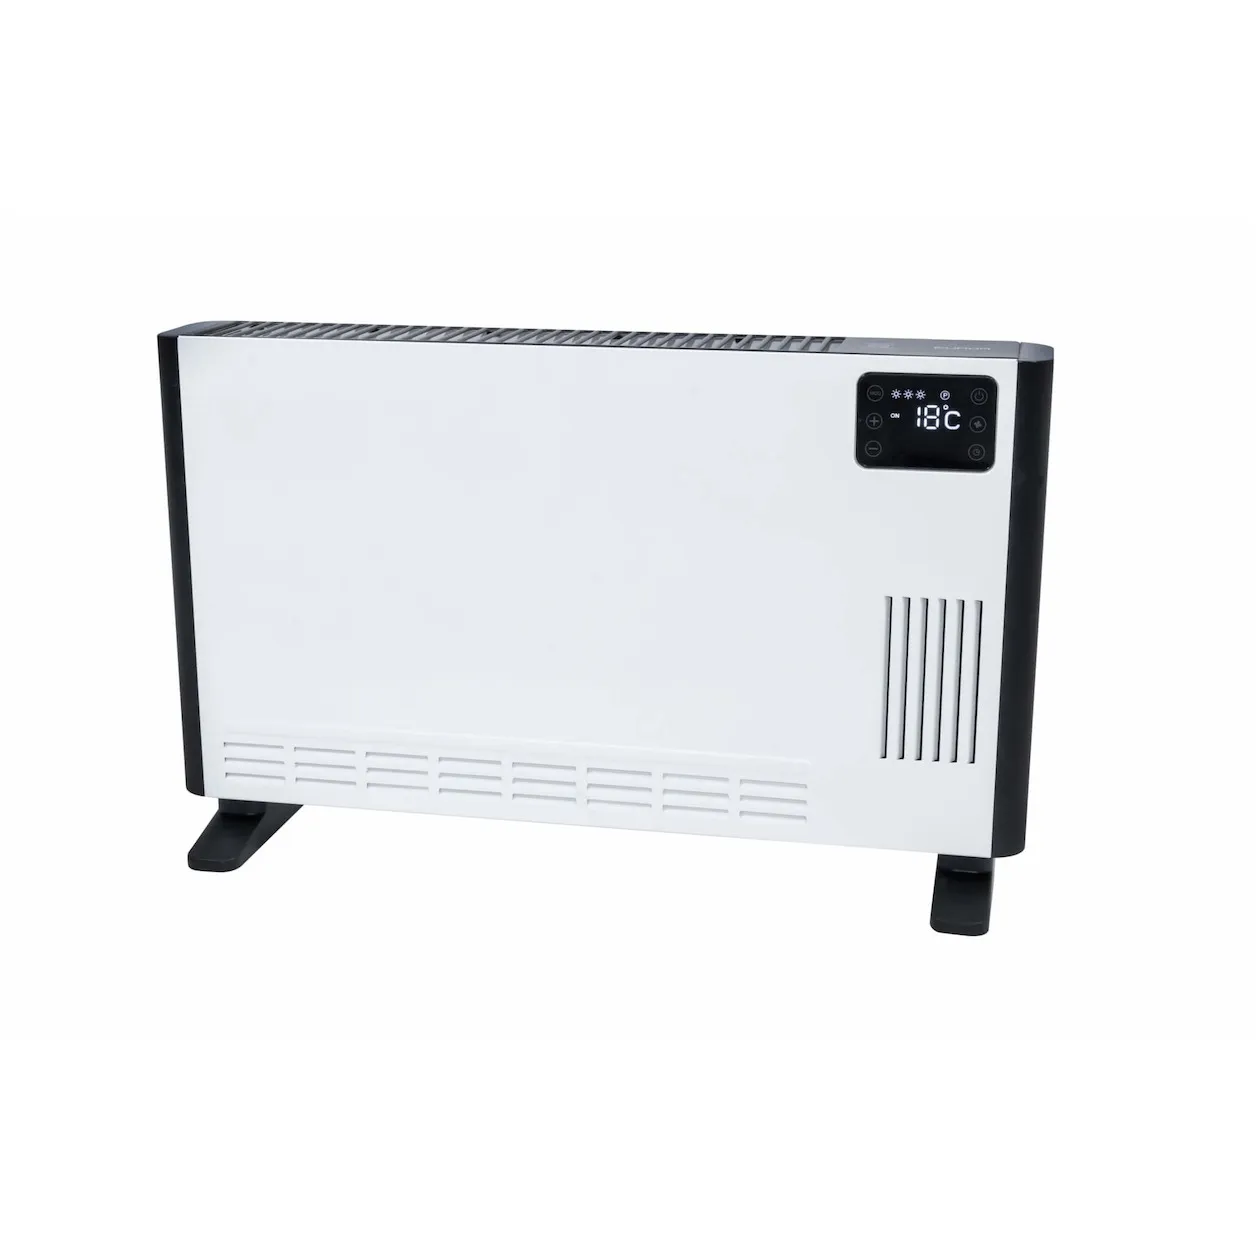 Eurom Safe-t-Convect 2400 Convector heater